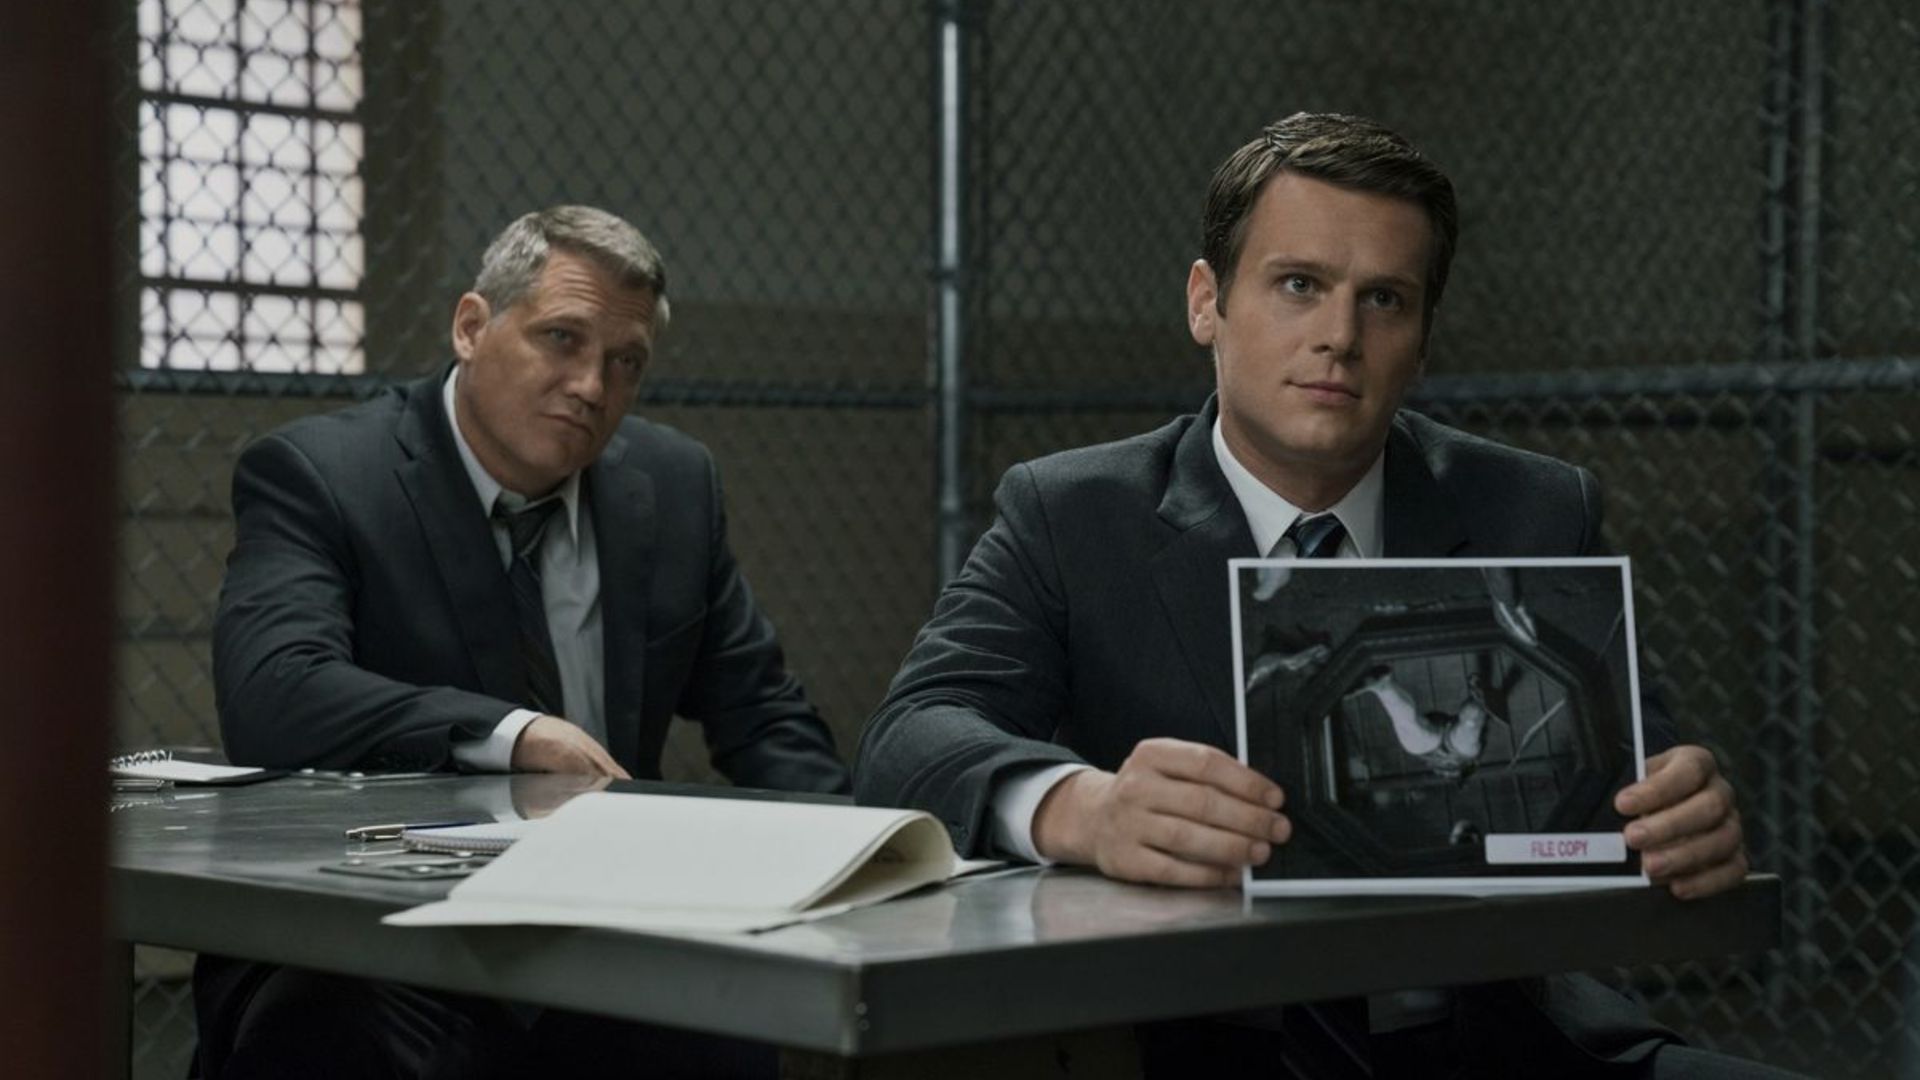 Mindhunter director shares story details about scrapped season 3